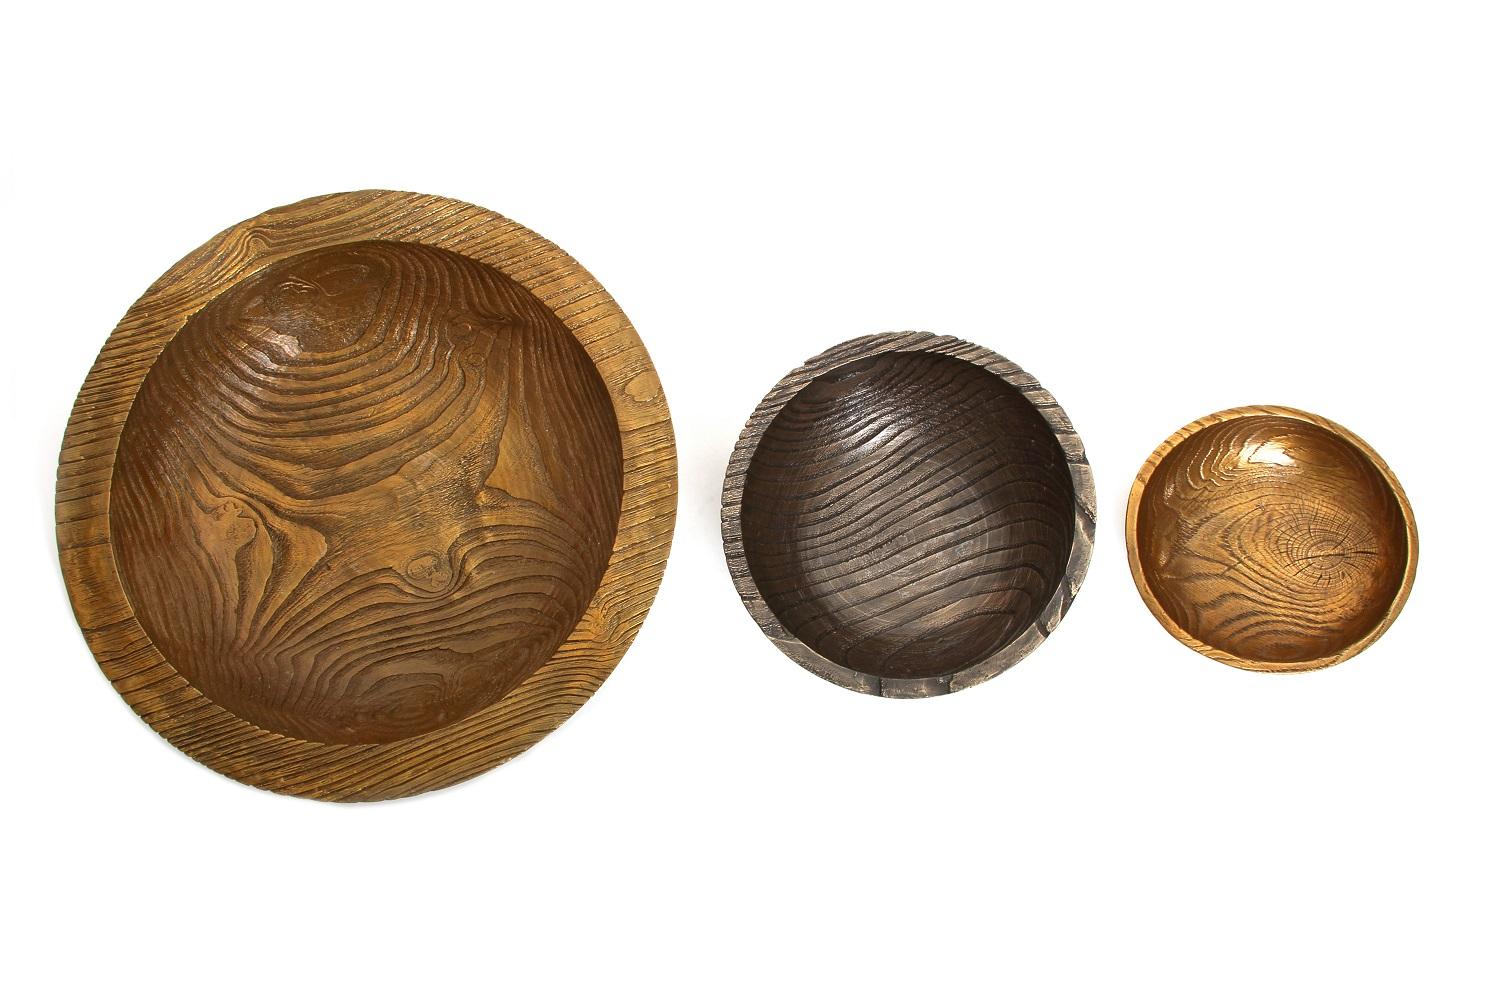 Solid bronze set – ‘Everest’, ‘alpine’ and ‘flora’ bowls/vessels with wood grain texture and mixed patinas - new production and in stock
-
This set includes our three most popular bowls: 